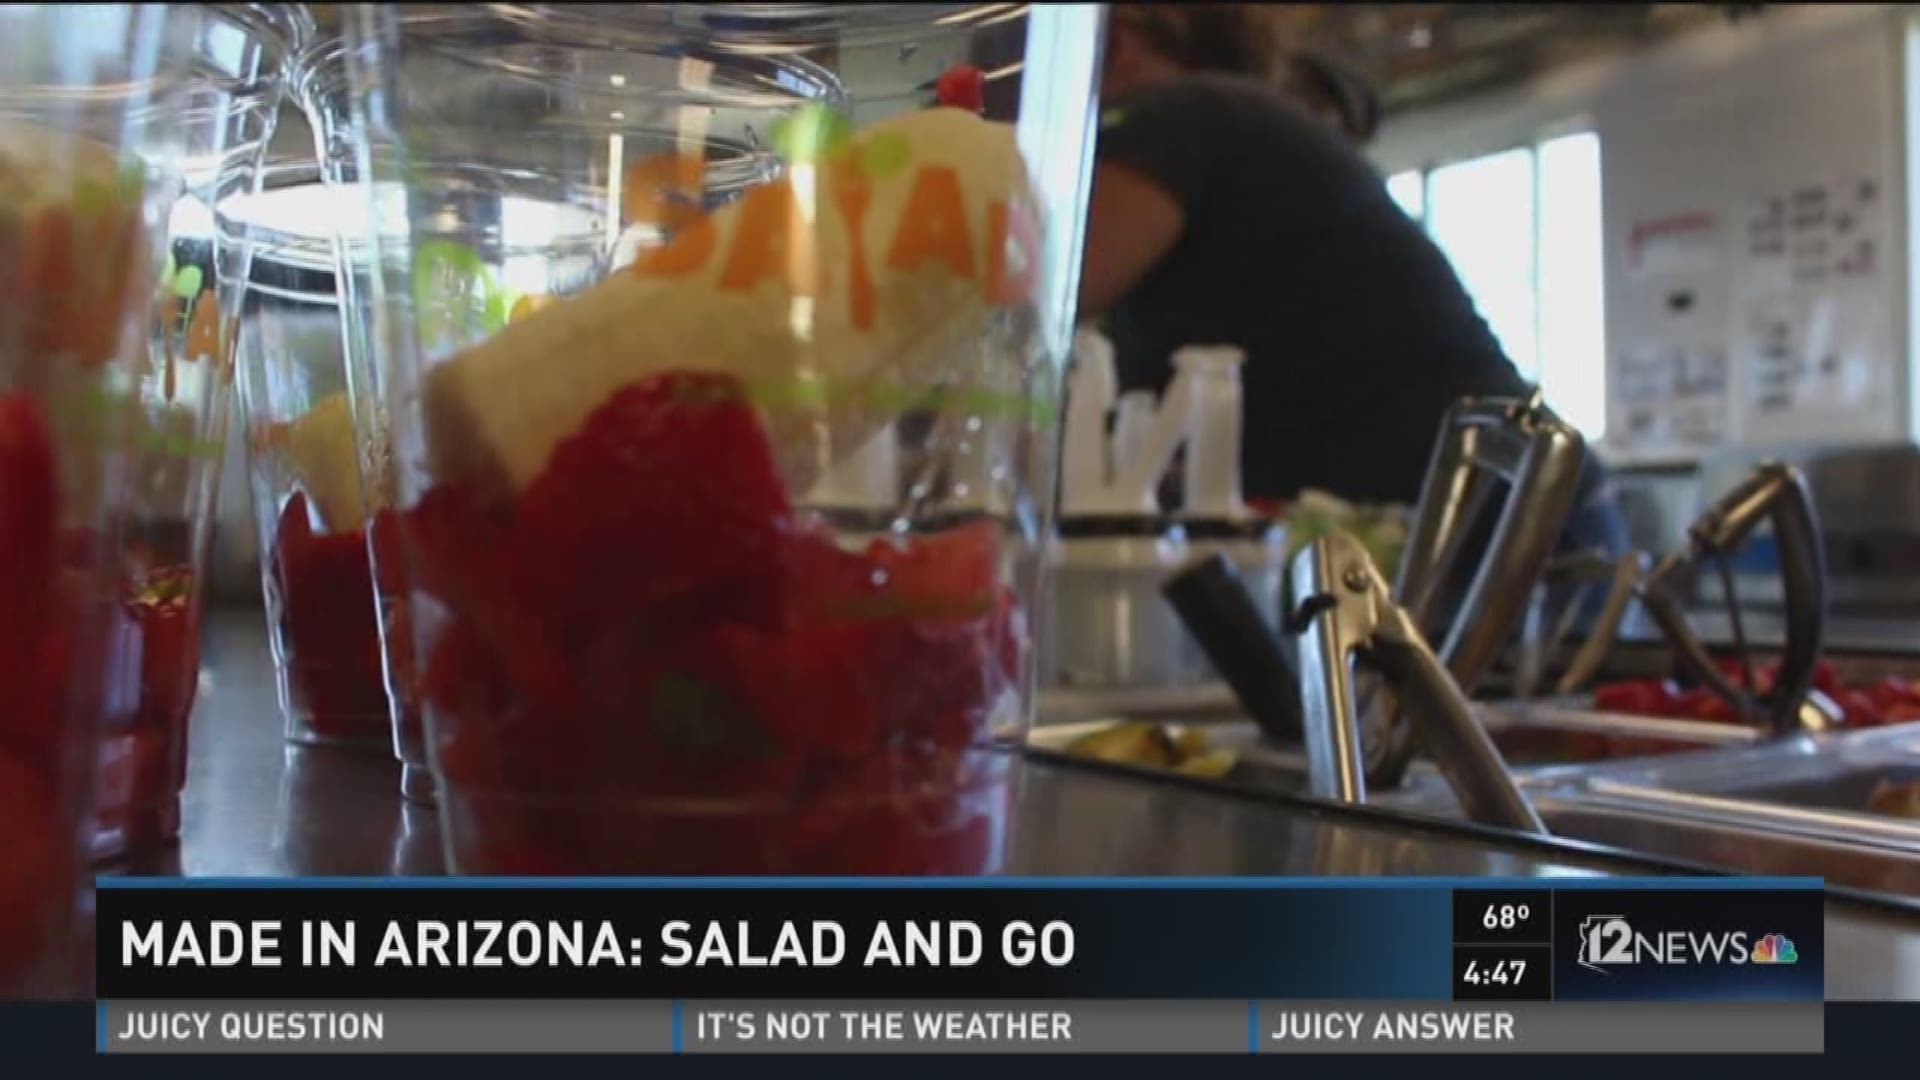 'Salad and Go' pride themselves on producing and selling fresh produce grown in Arizona.